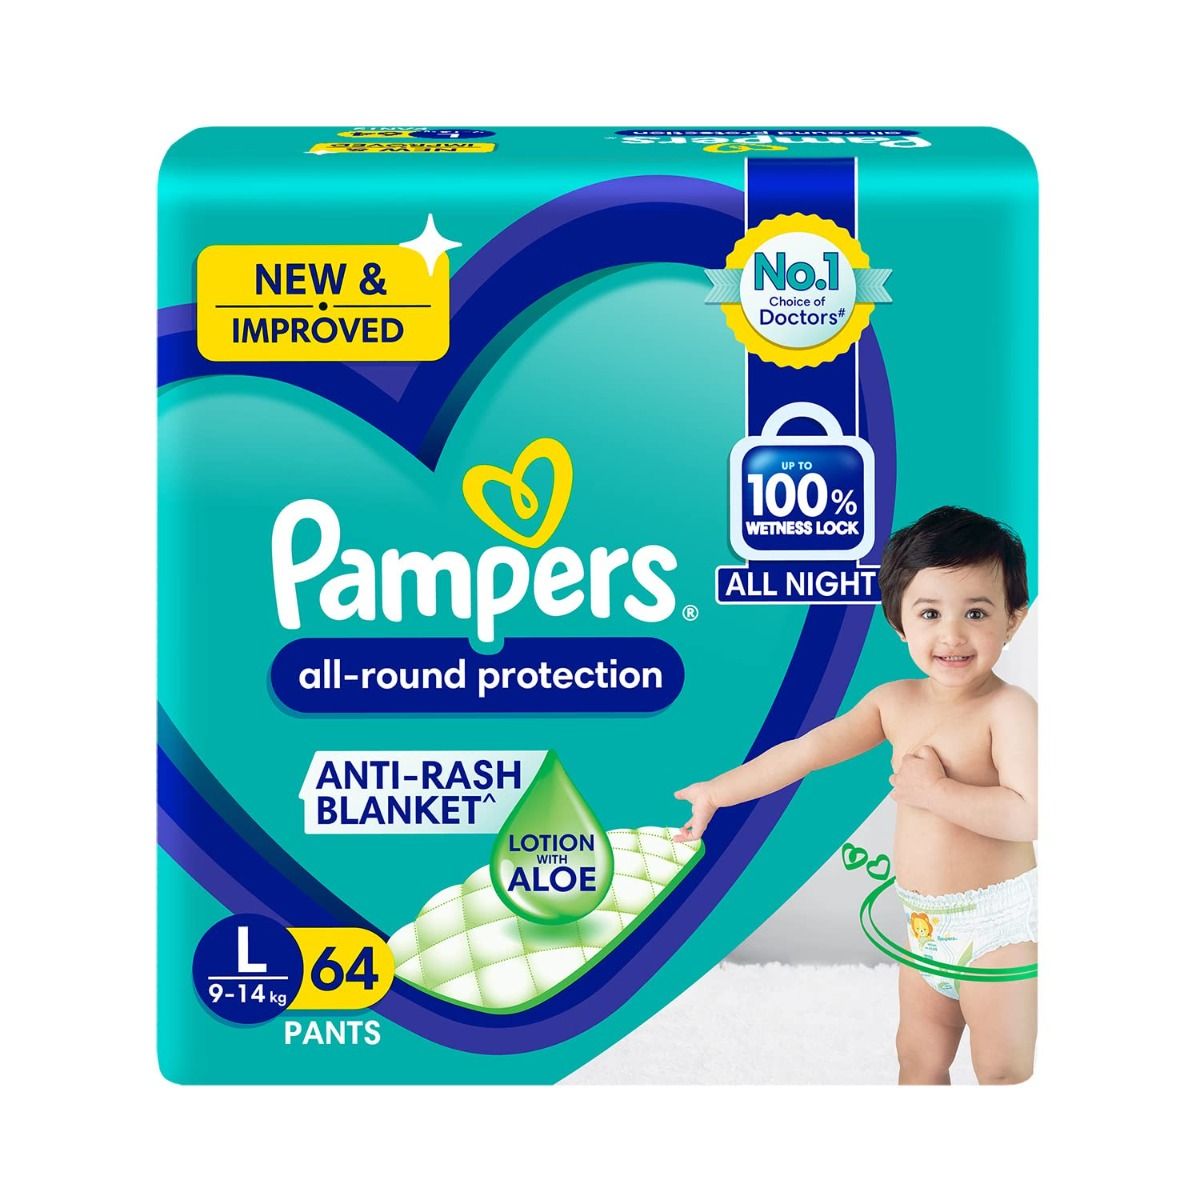 Buy Pampers All-Round Protection Diaper Pants Large, 64 Count Online